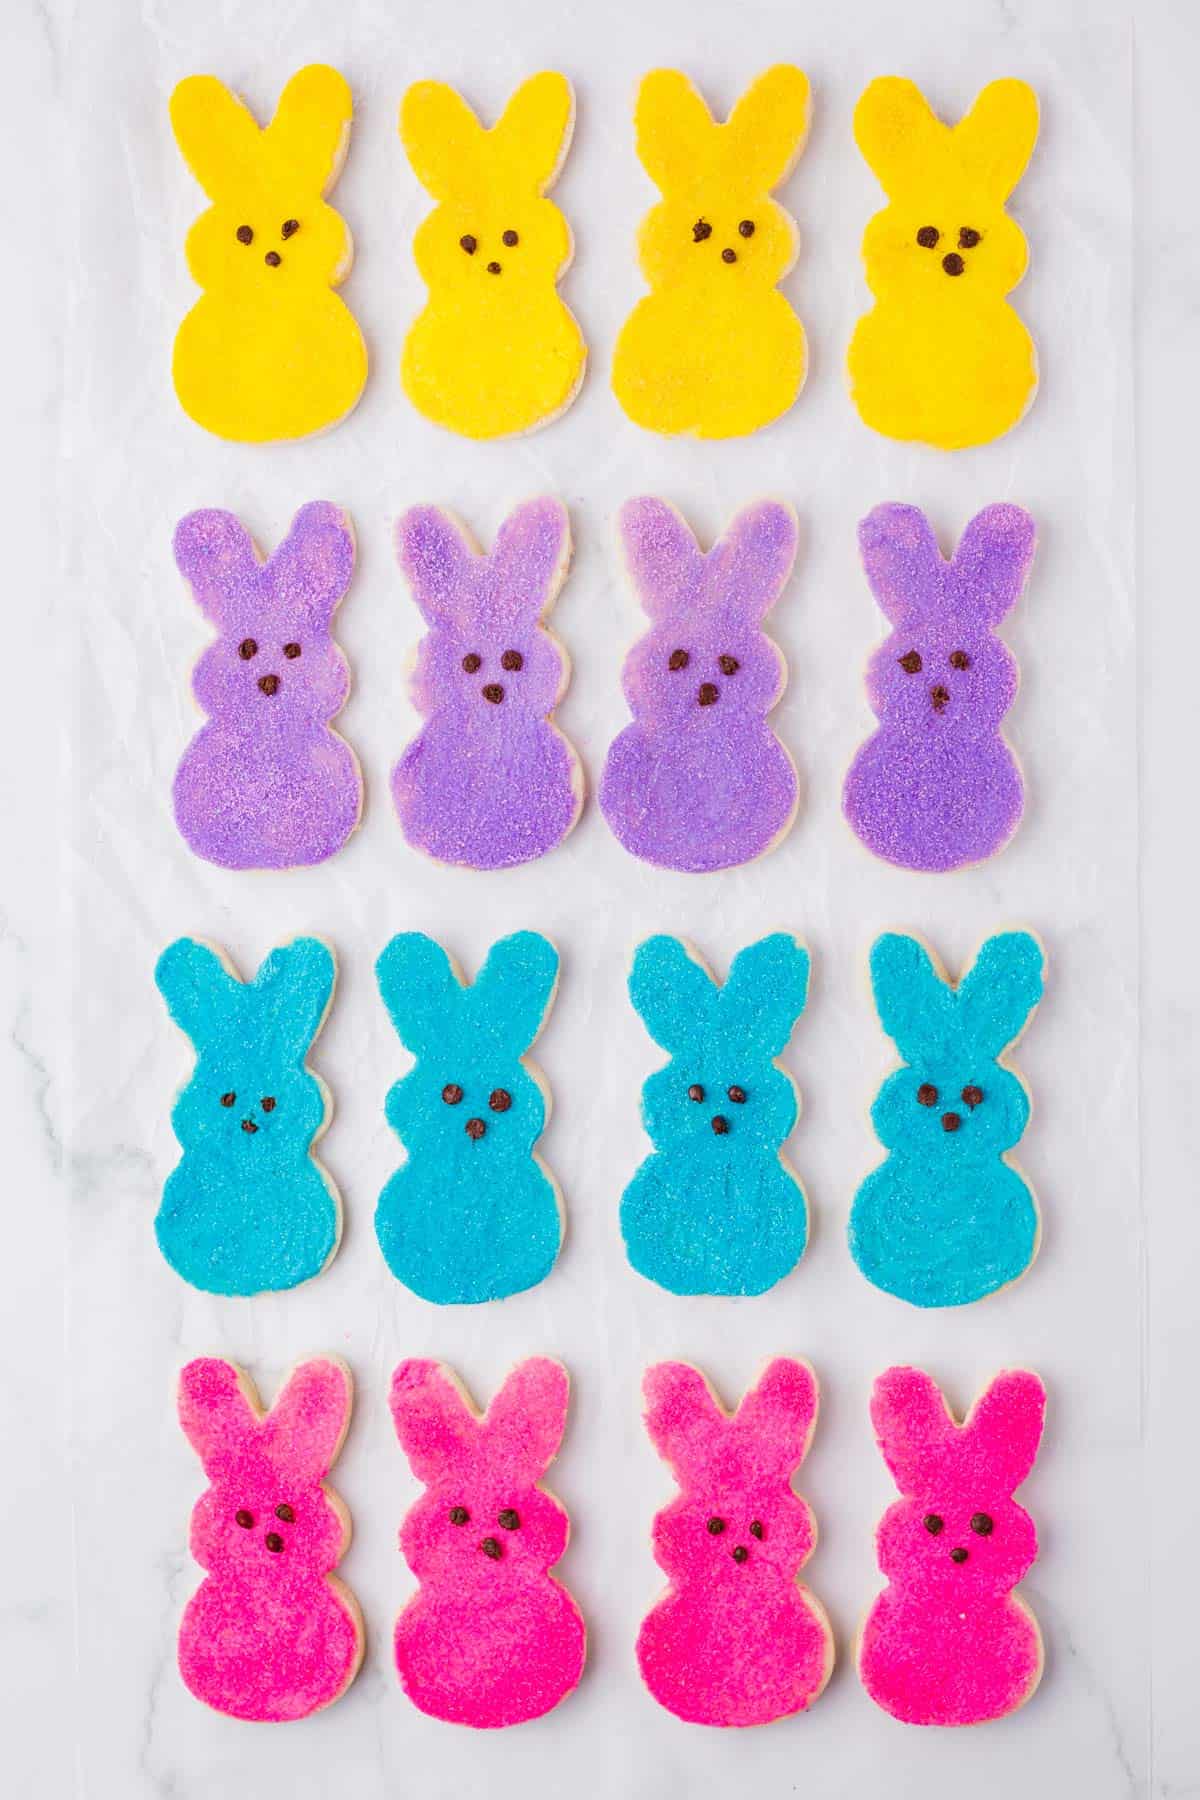 rows of yellow, blue, purple and pink peeps bunny cookies lined up on a countertop surface